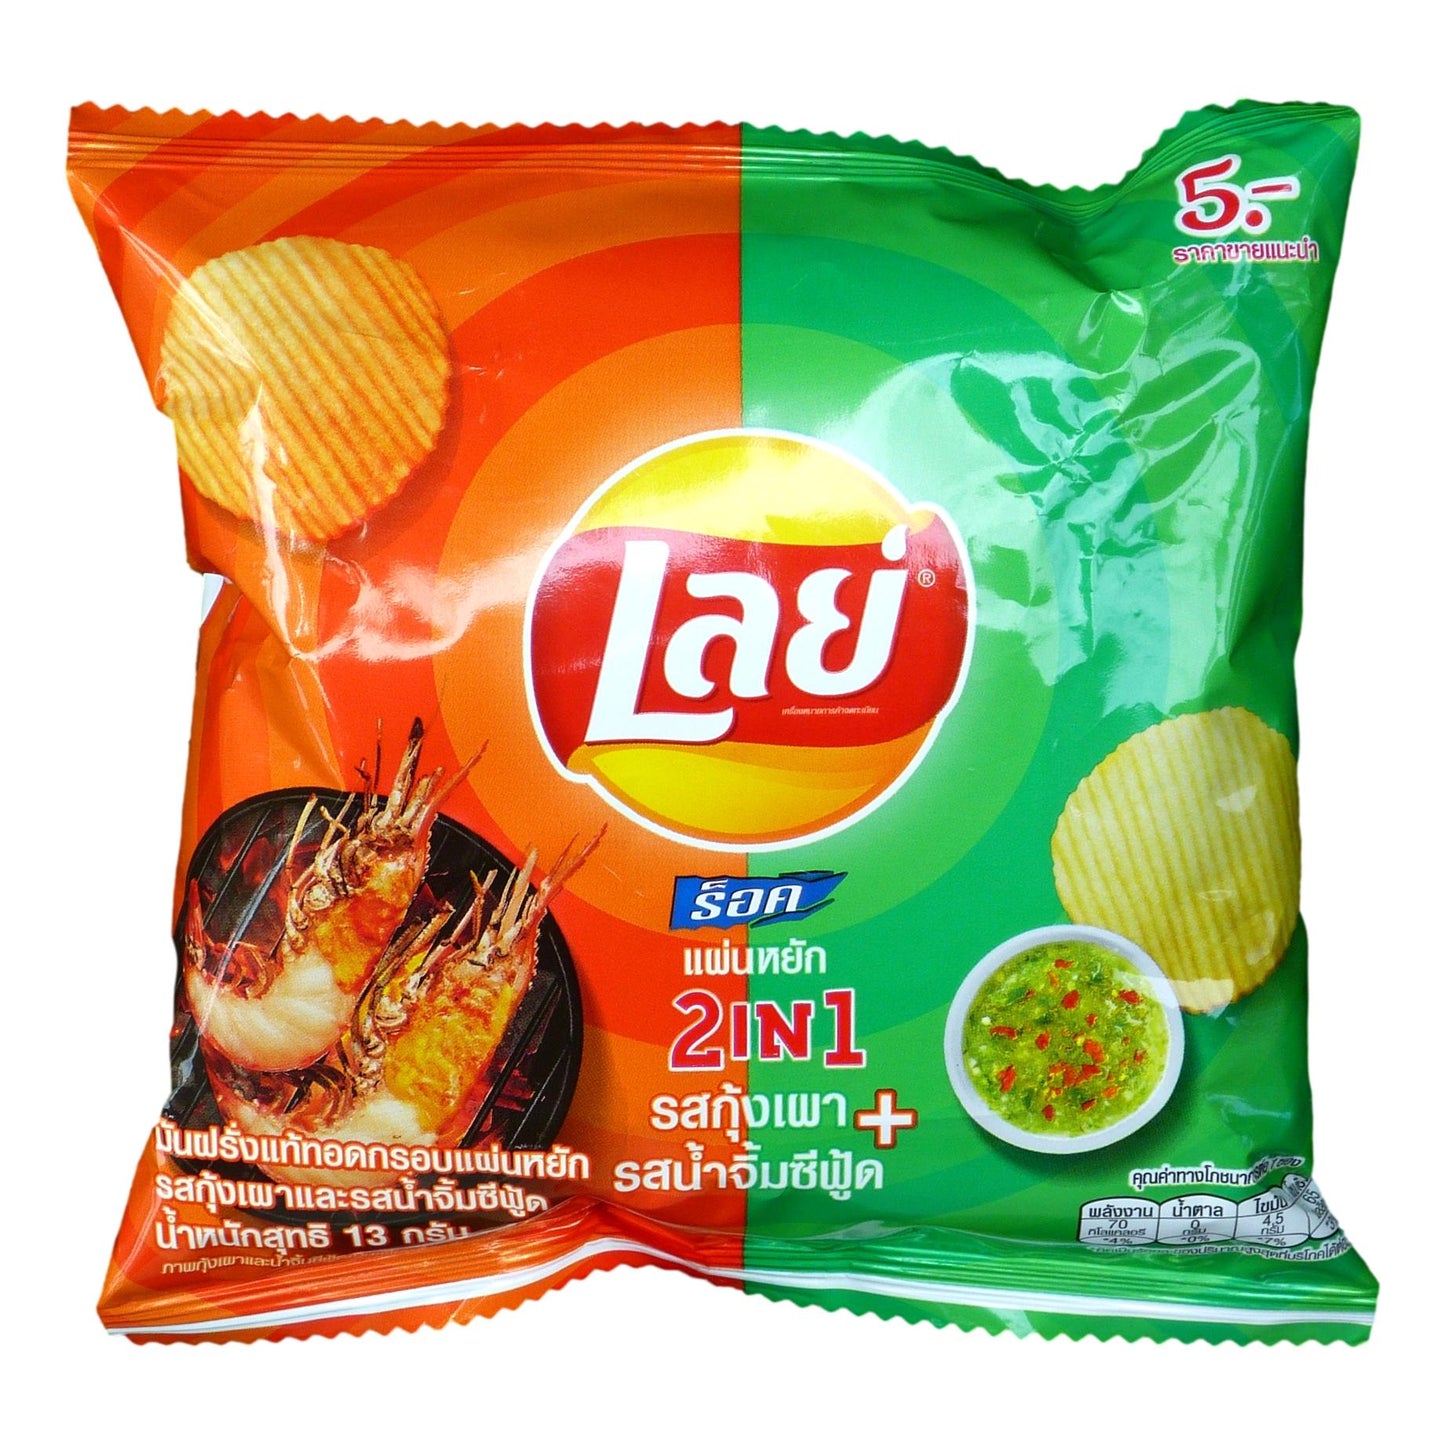 Lay's Brand Thai Potato Chips Grilled Shrimp and Seafood Sauce Flavor 13g (Pack of 12) - Asian Beauty Supply